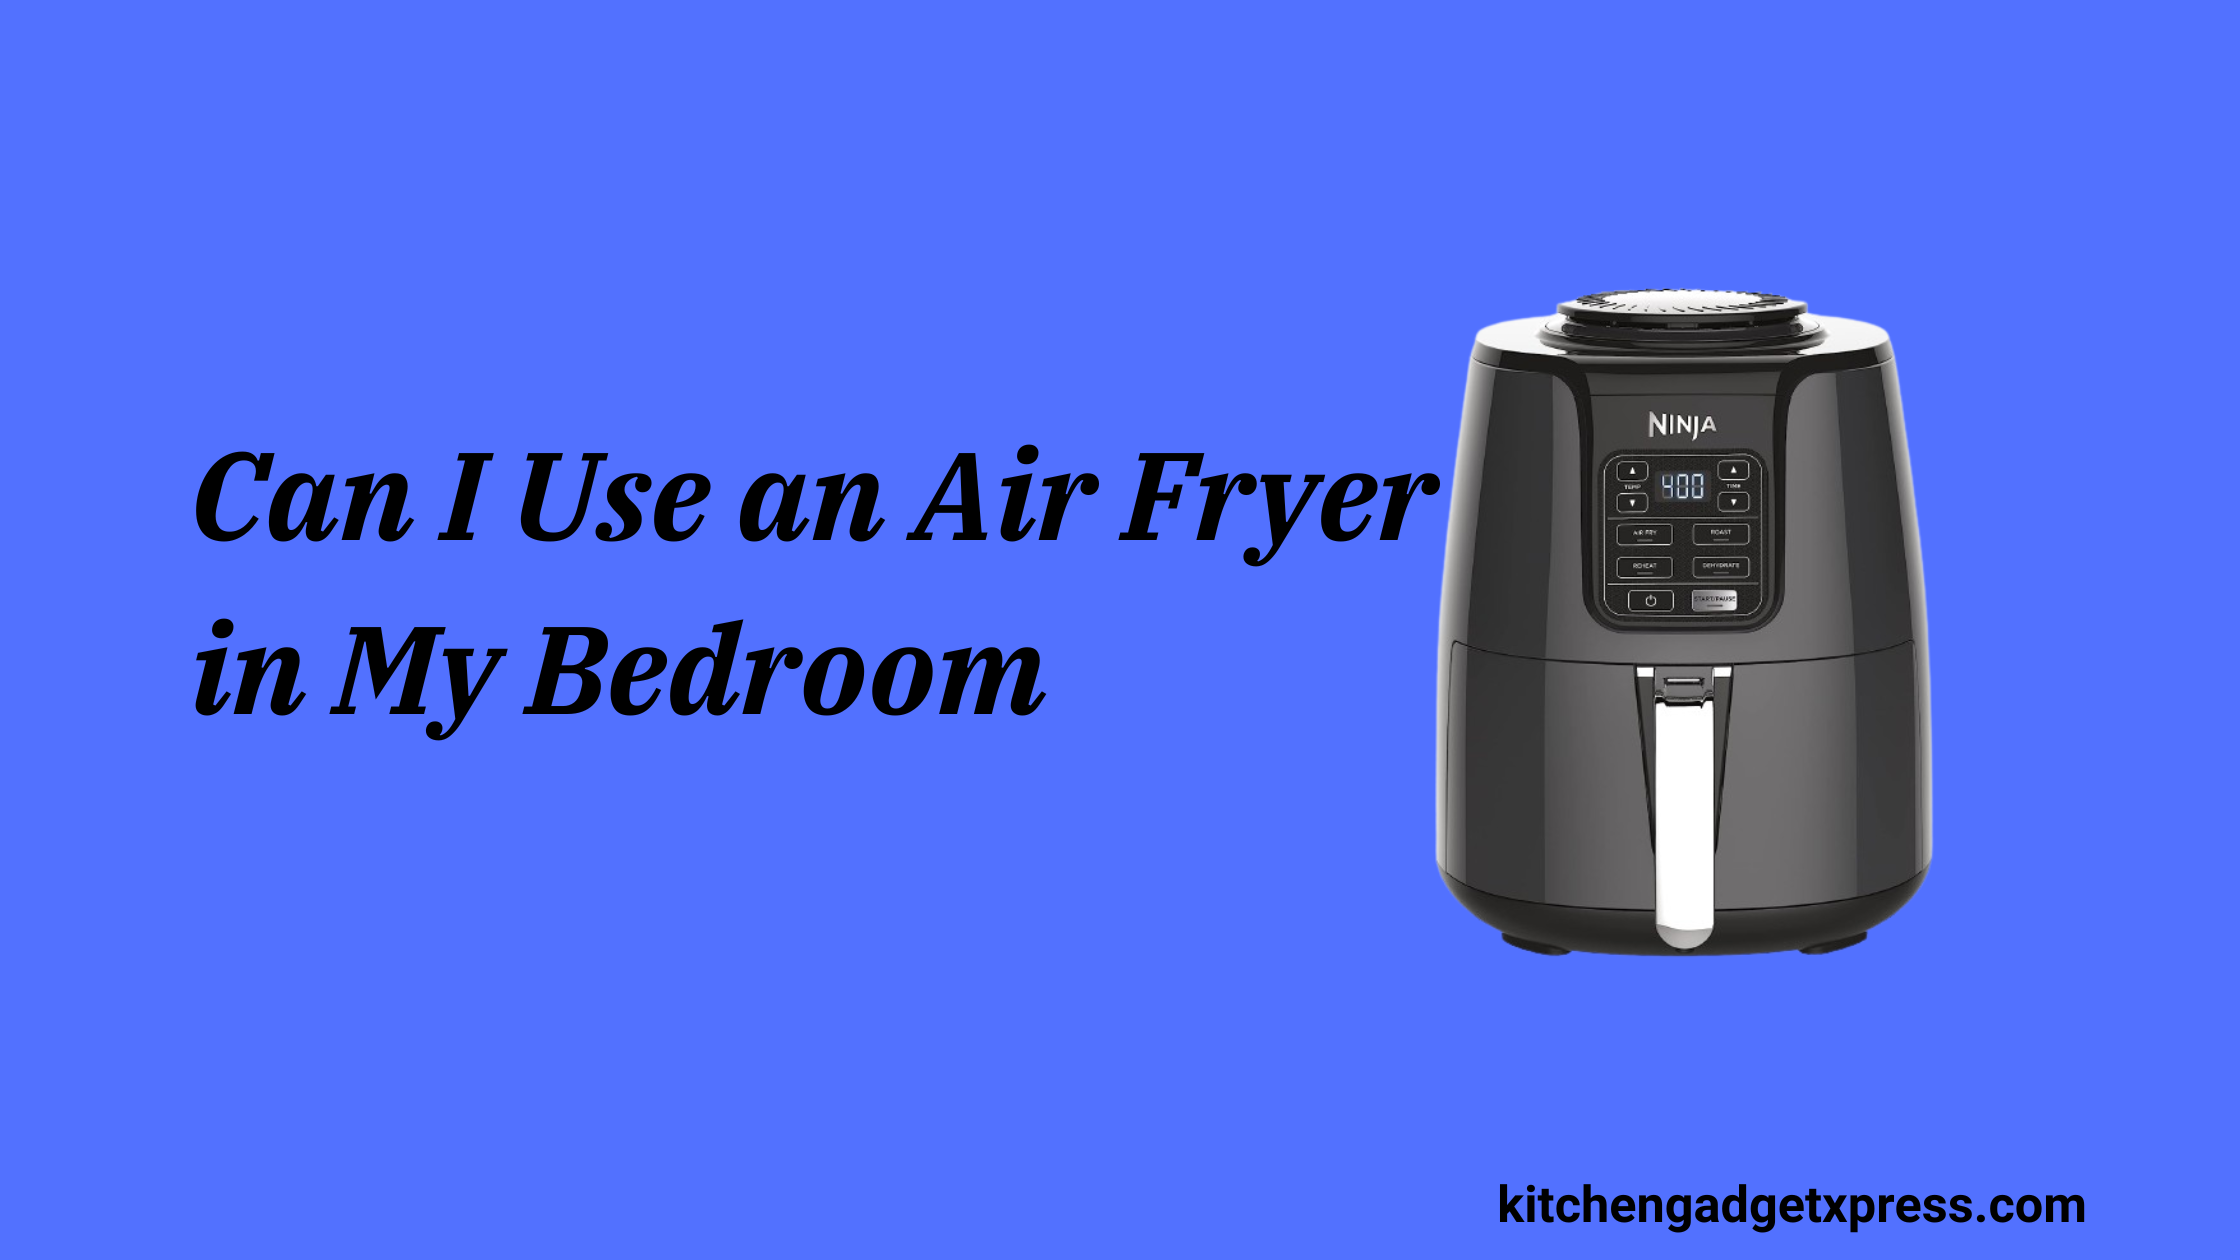 Can I Use an Air Fryer in My Bedroom